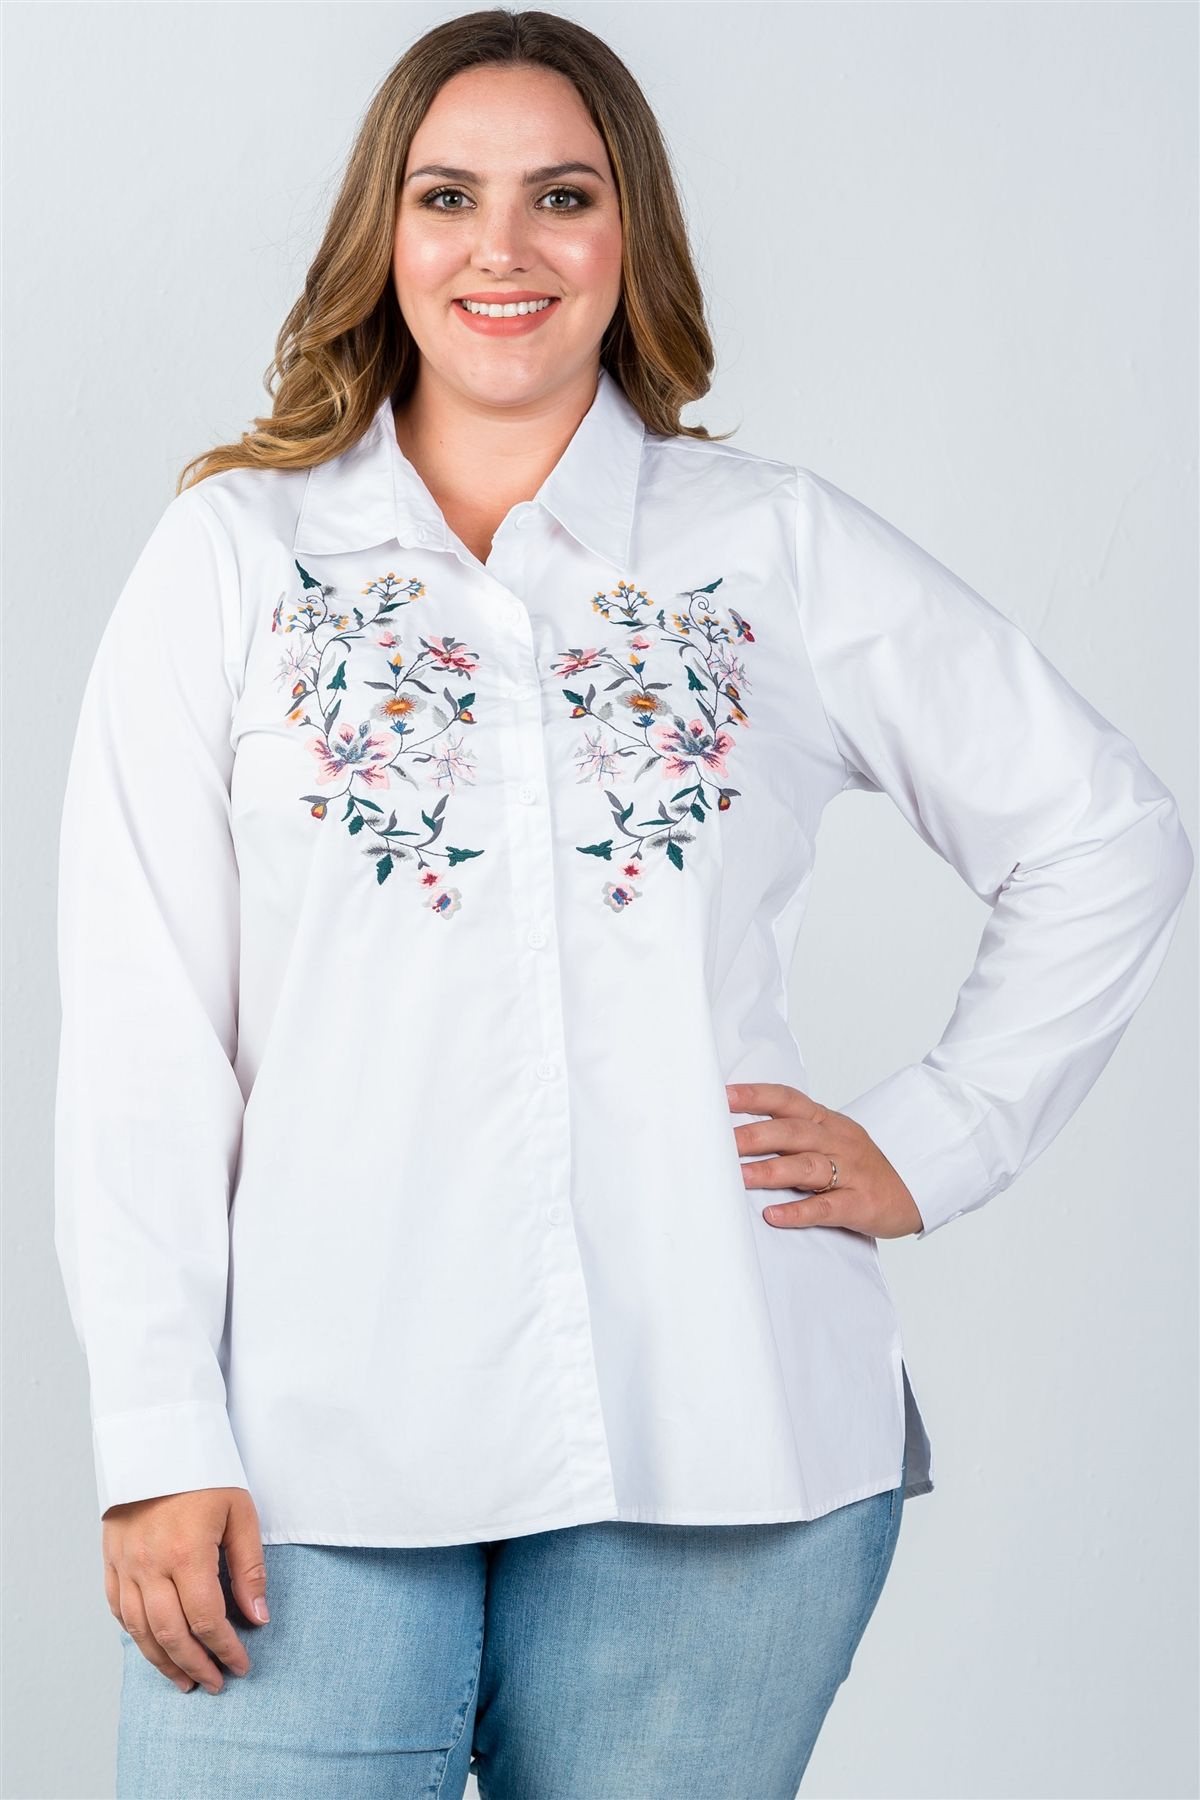 Ladies fashion plus size floral embroidered button down shirt